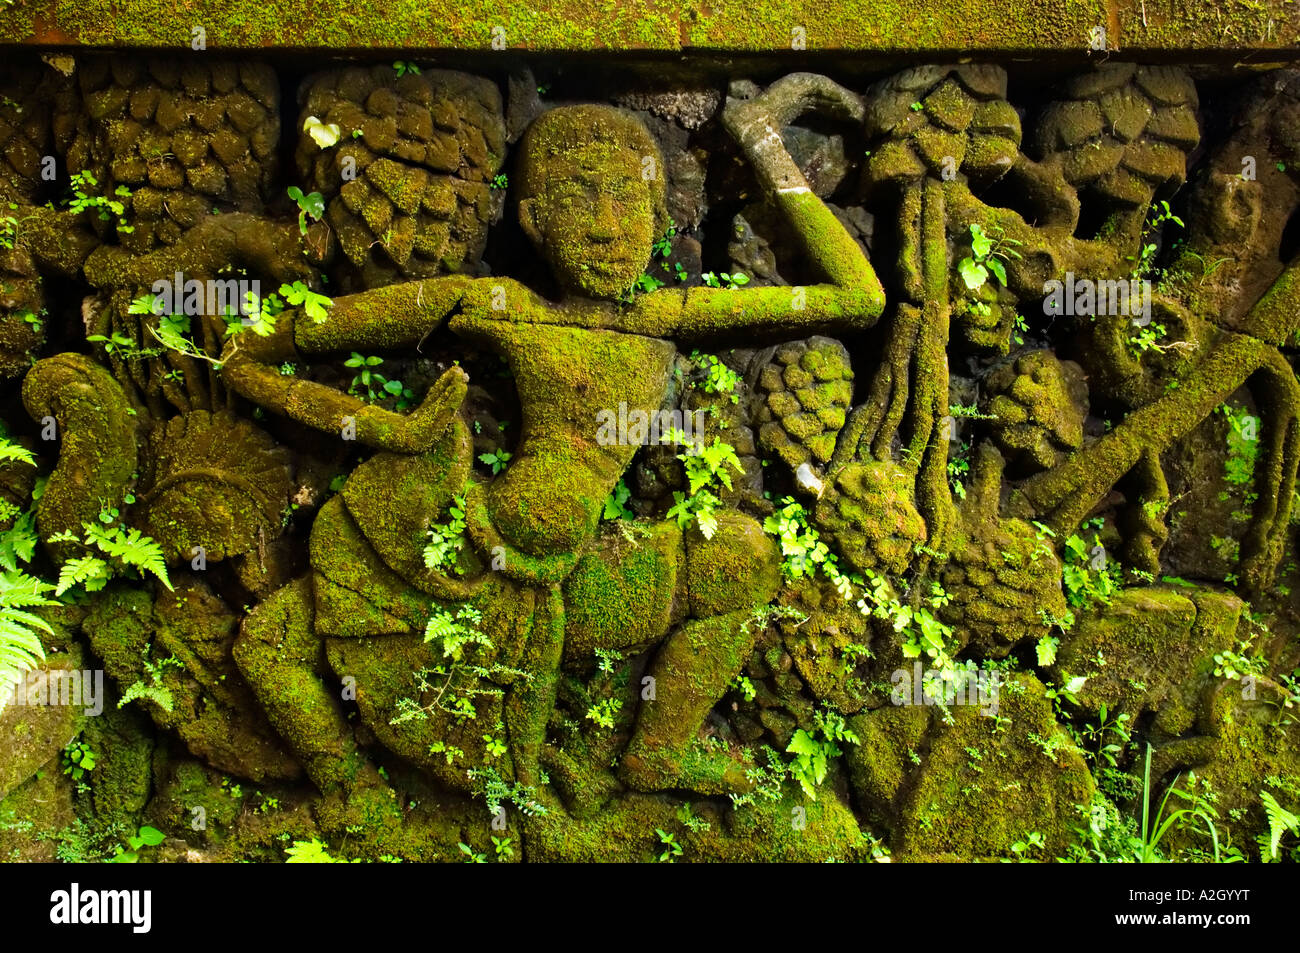 Indonesia Bali Ubud Agung Rai Museum of Art ARMA stone images covered by green moss and small plants dancer Stock Photo